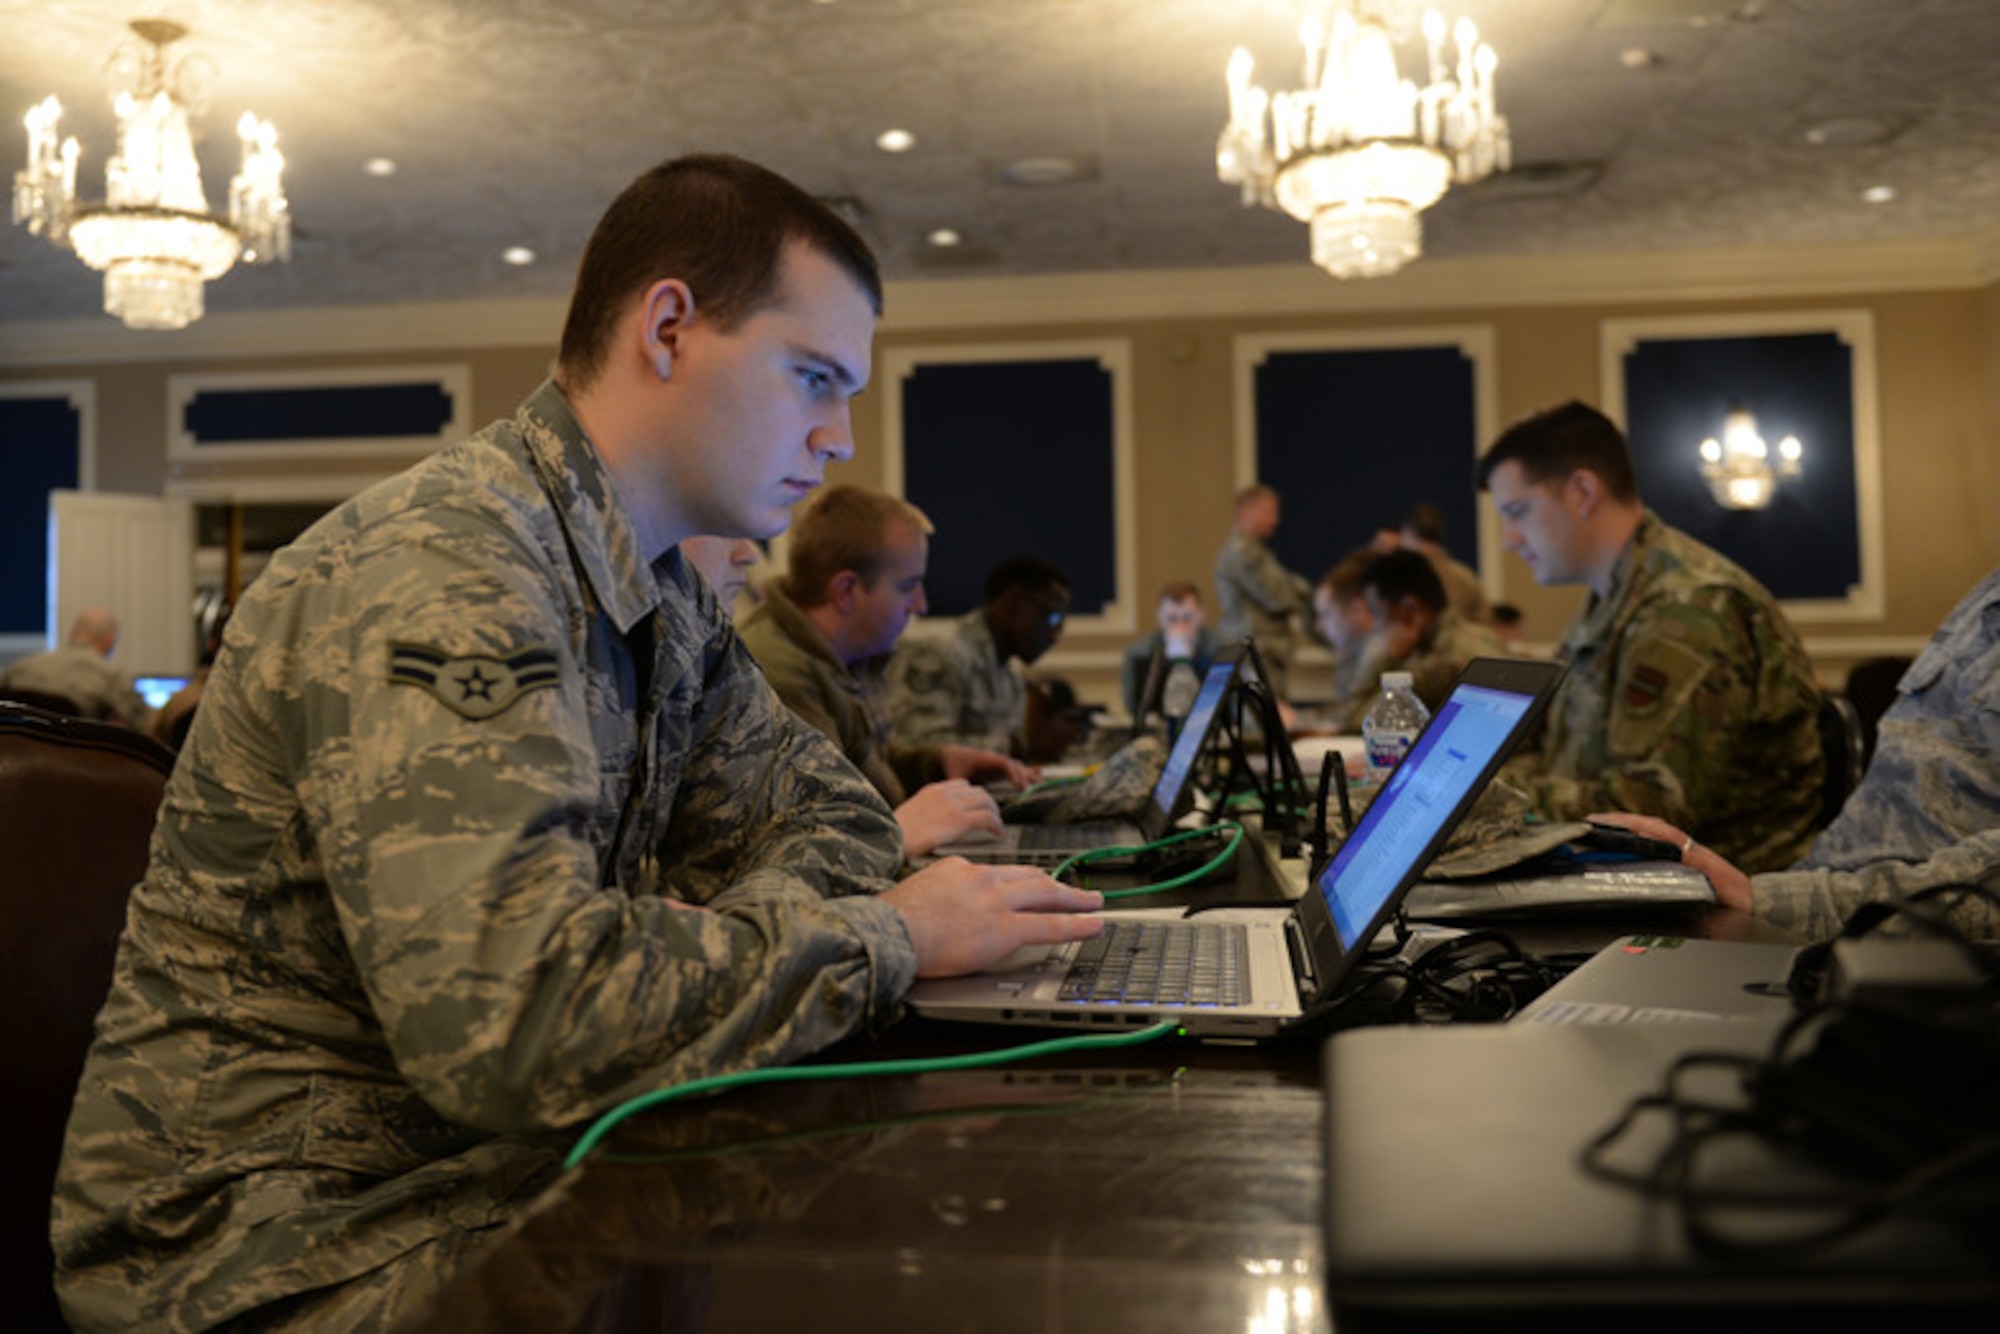 Members of the 55th Communications Group use temporary workstations in the Warhawk Community Center March 22, 2019, on Offutt Air Force Base, Neb.